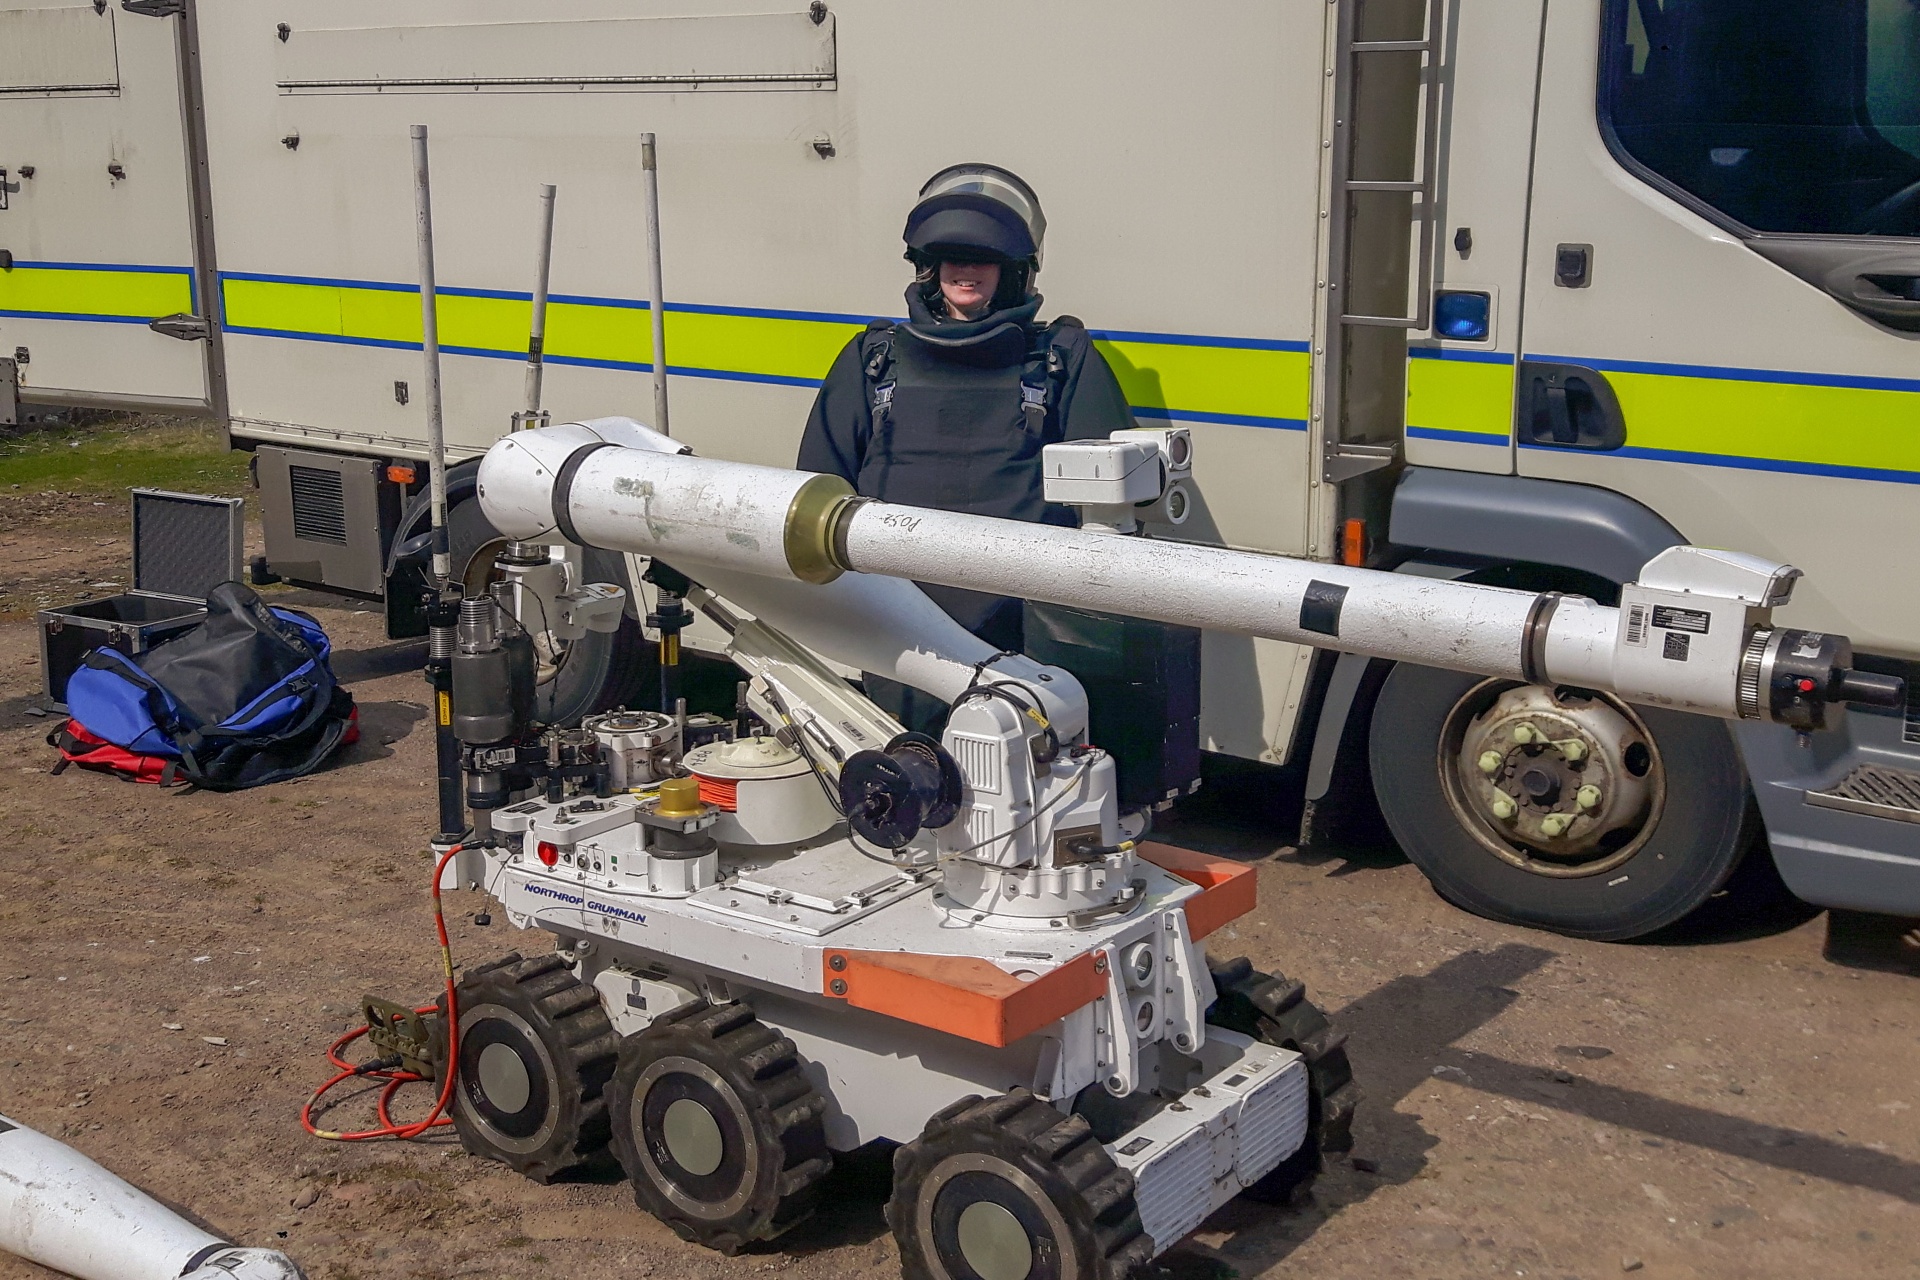 A student tries on a bomb disposal suit